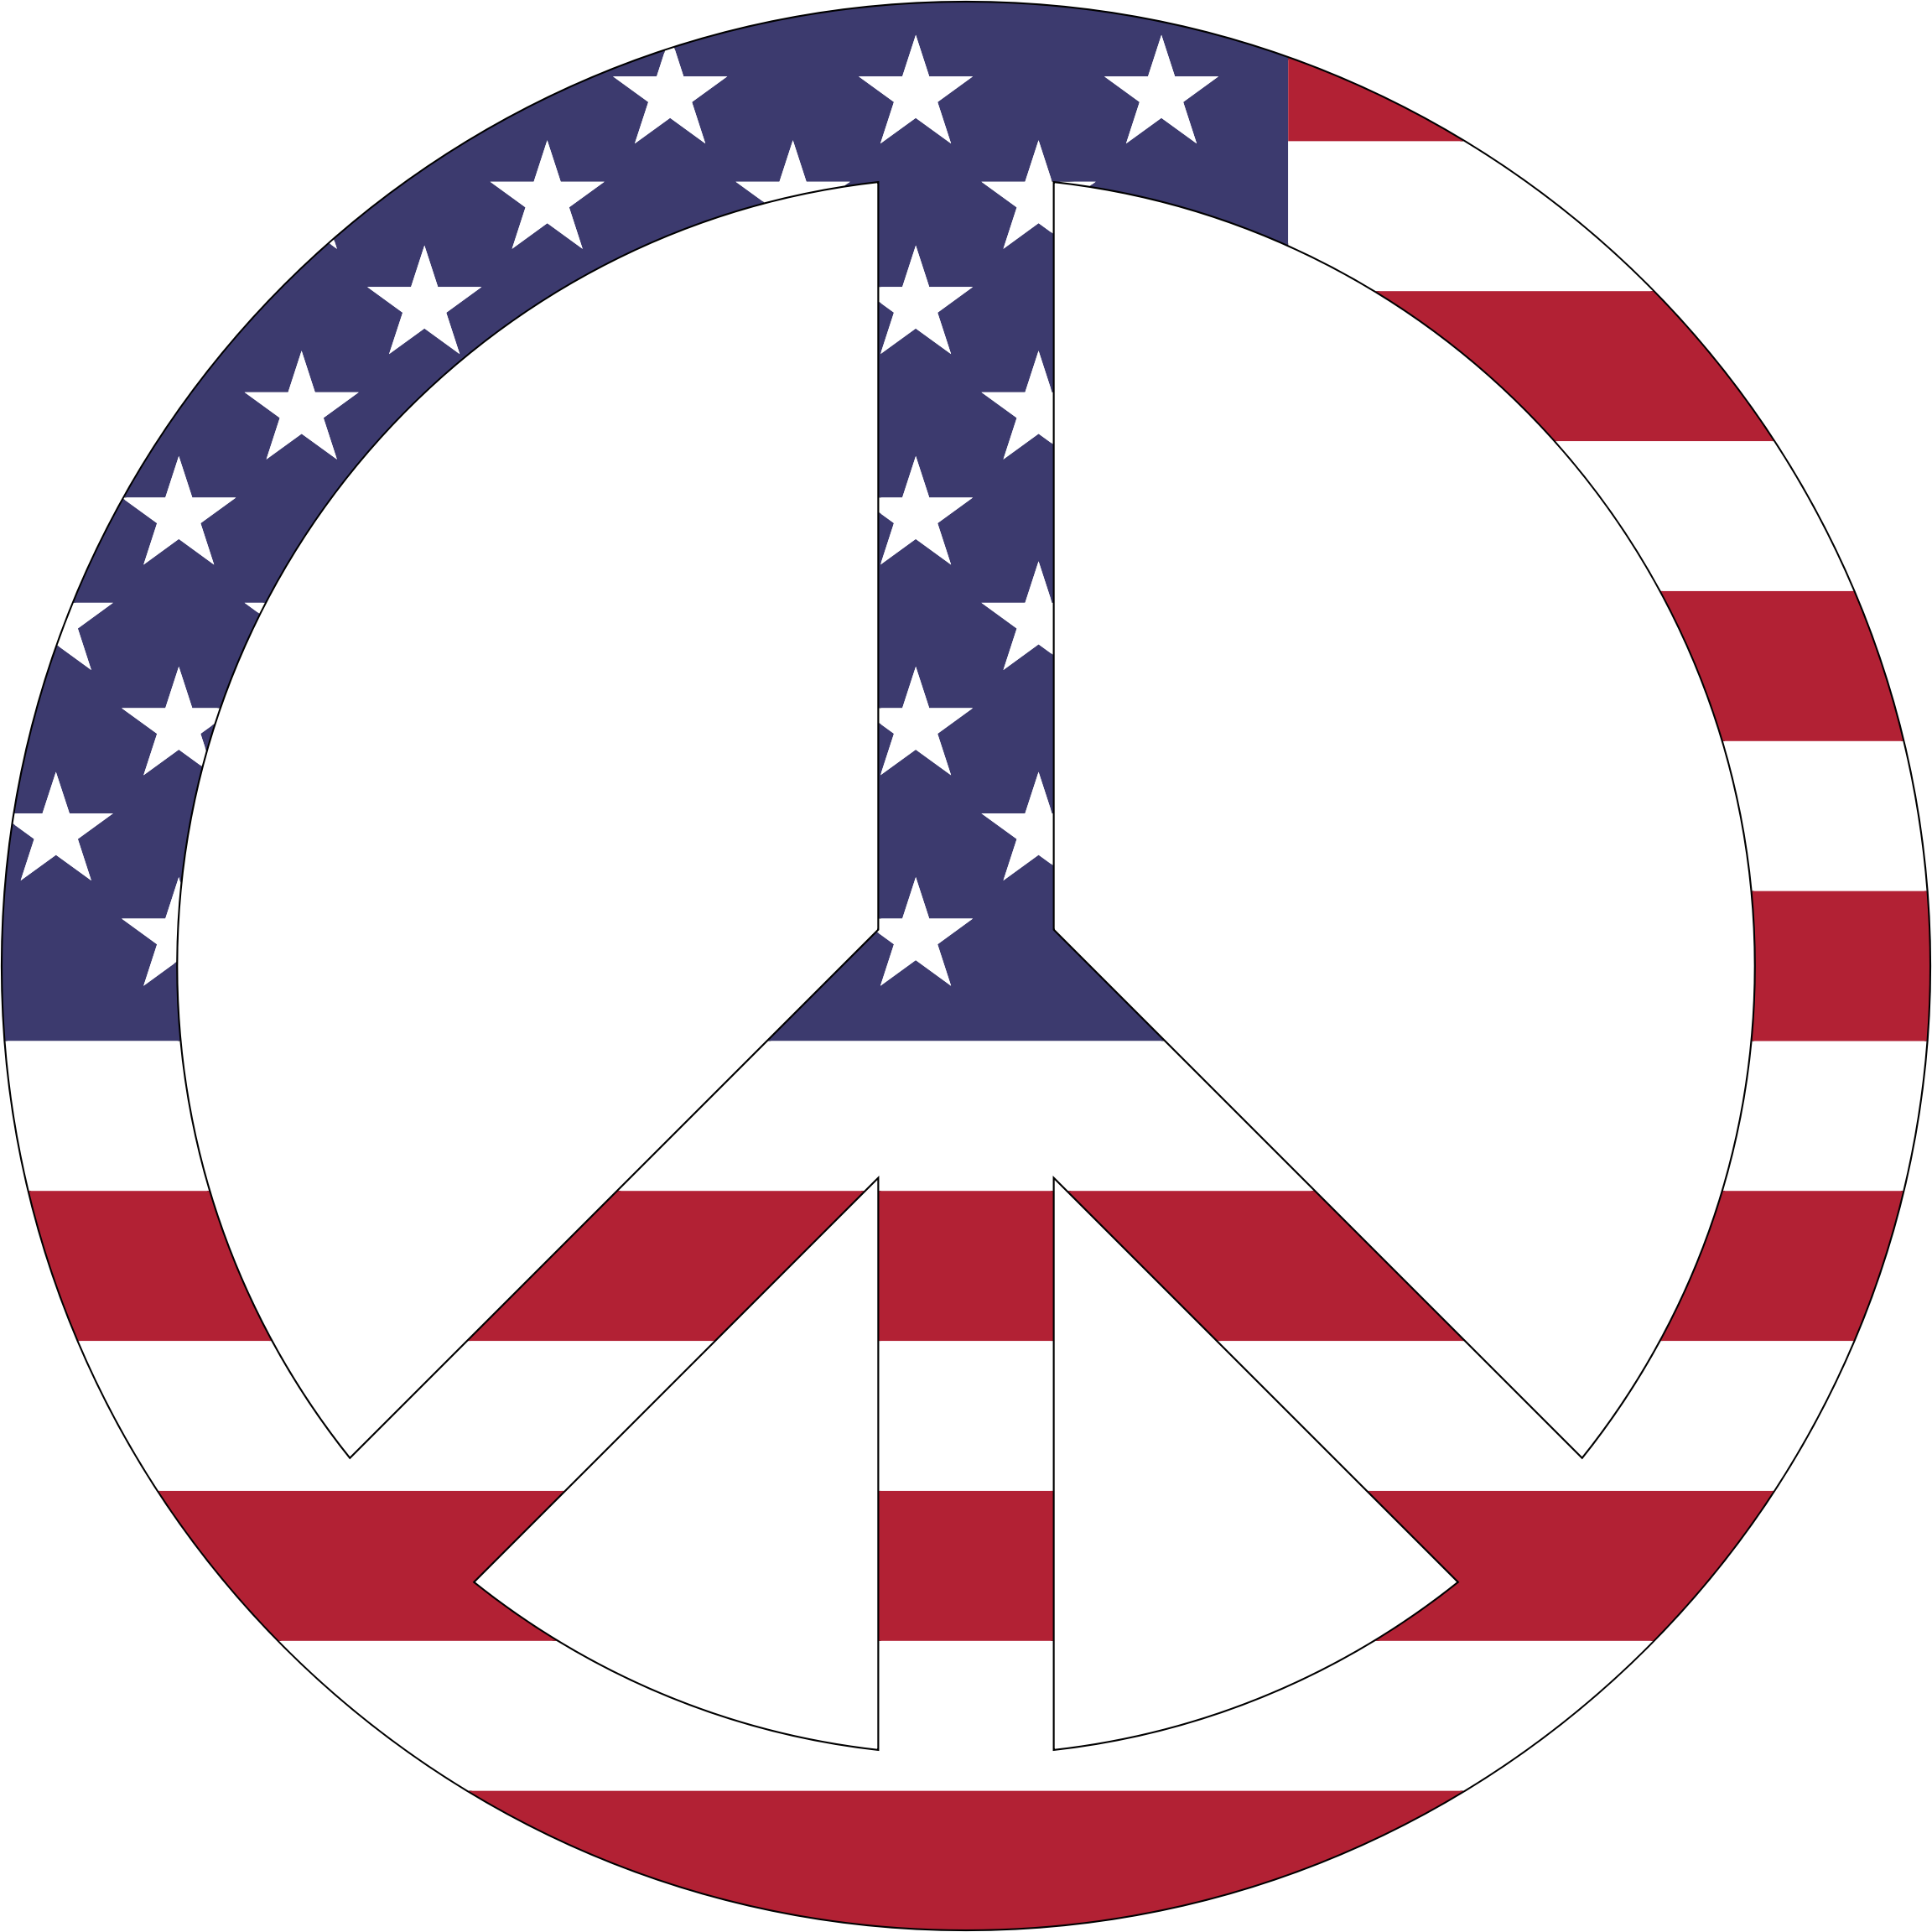 American Hippie Bohemian Psychedelic Art Flower Power - American Flag Peace Sign (2304x2304)